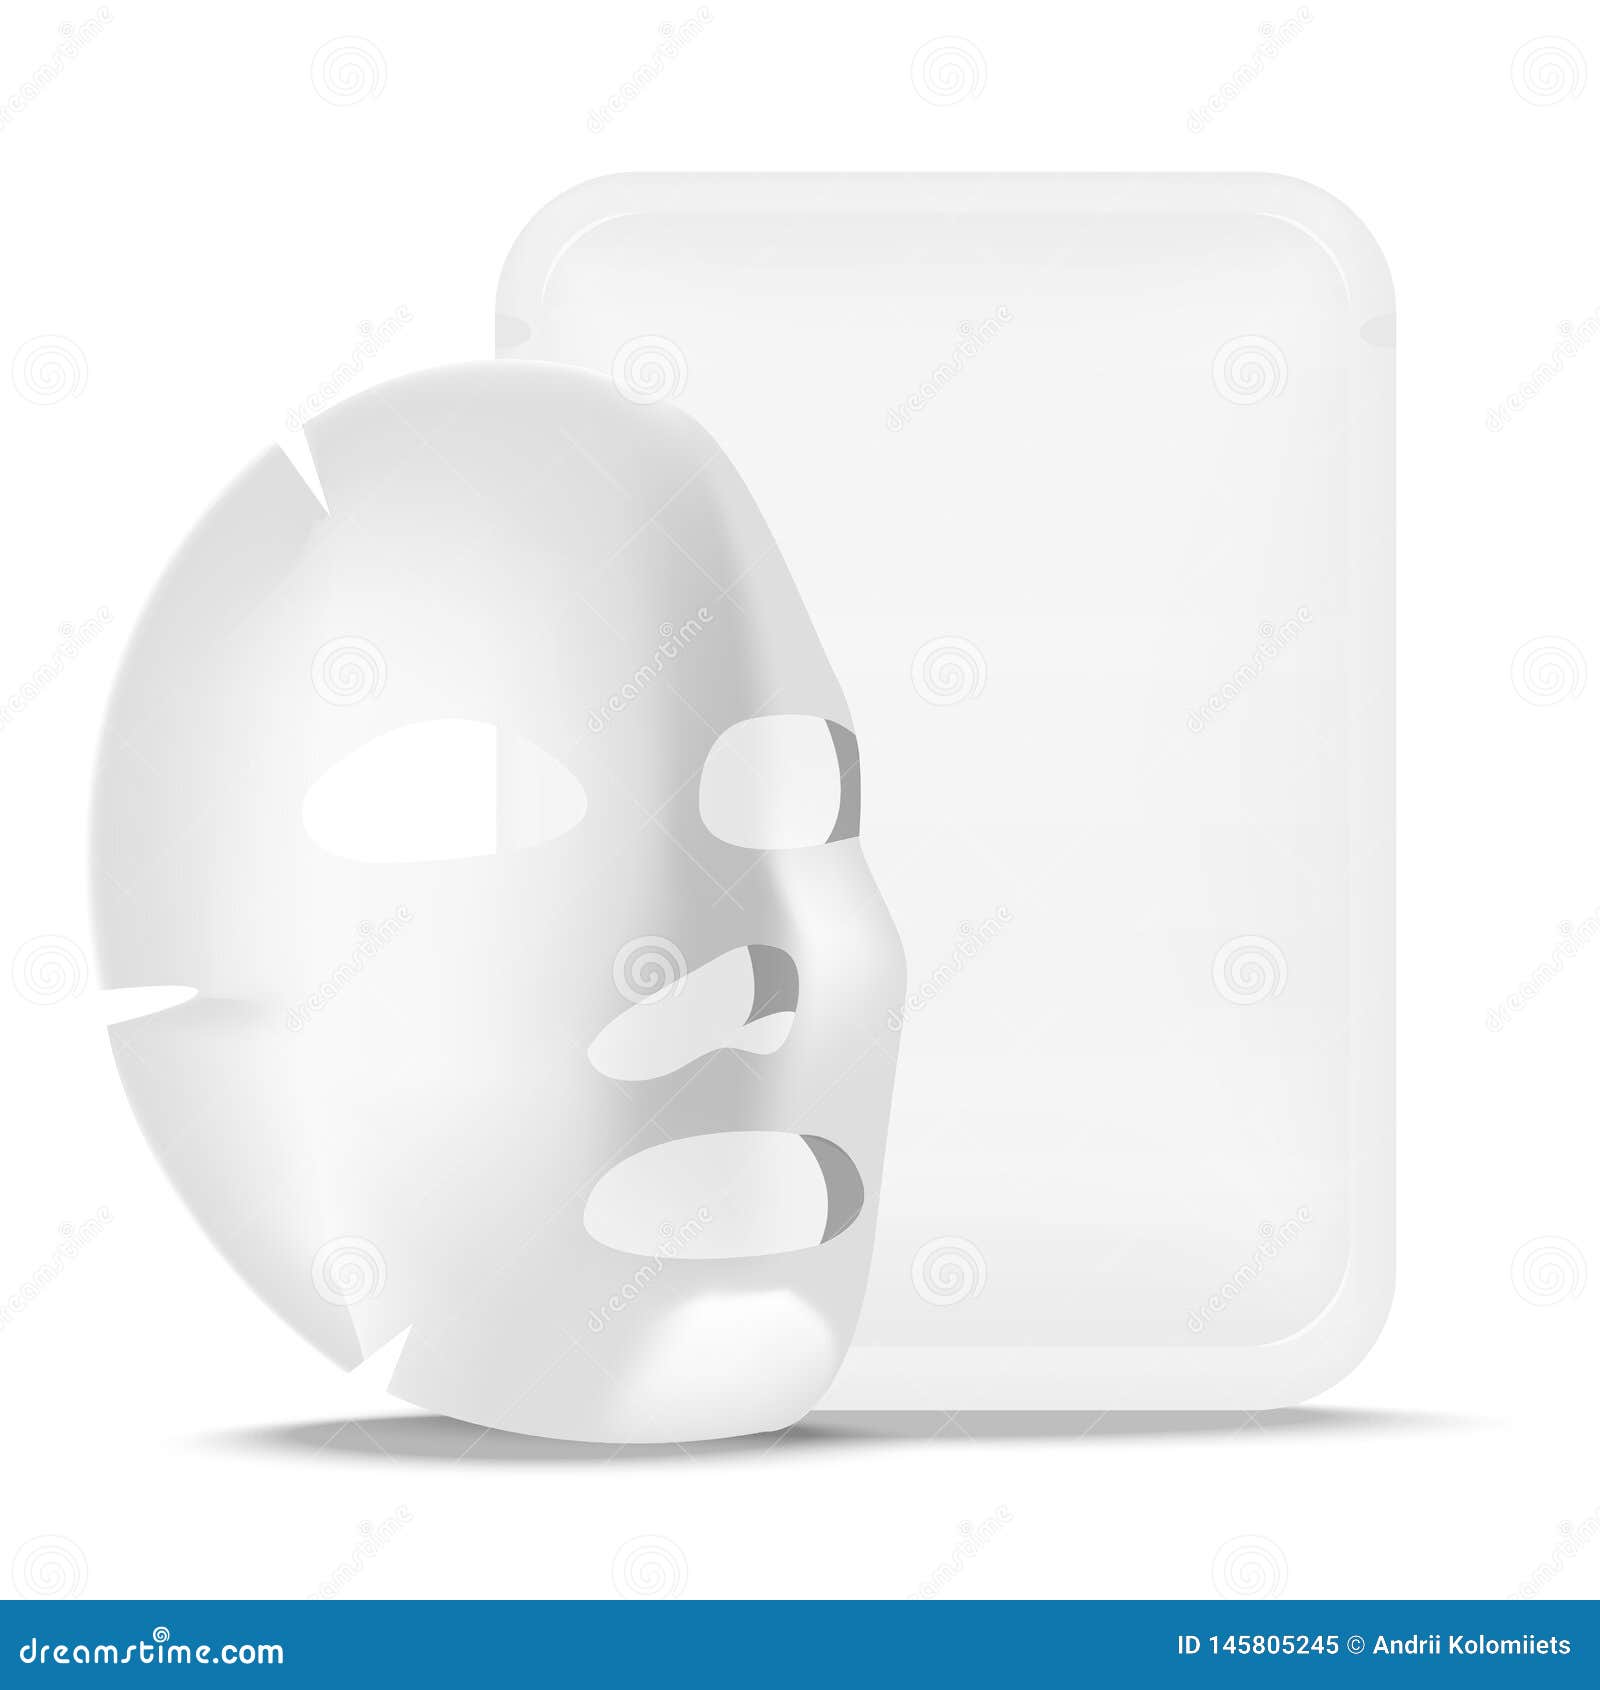 Download Realistic Vector White Sheet Facial Cosmetic Mask ...